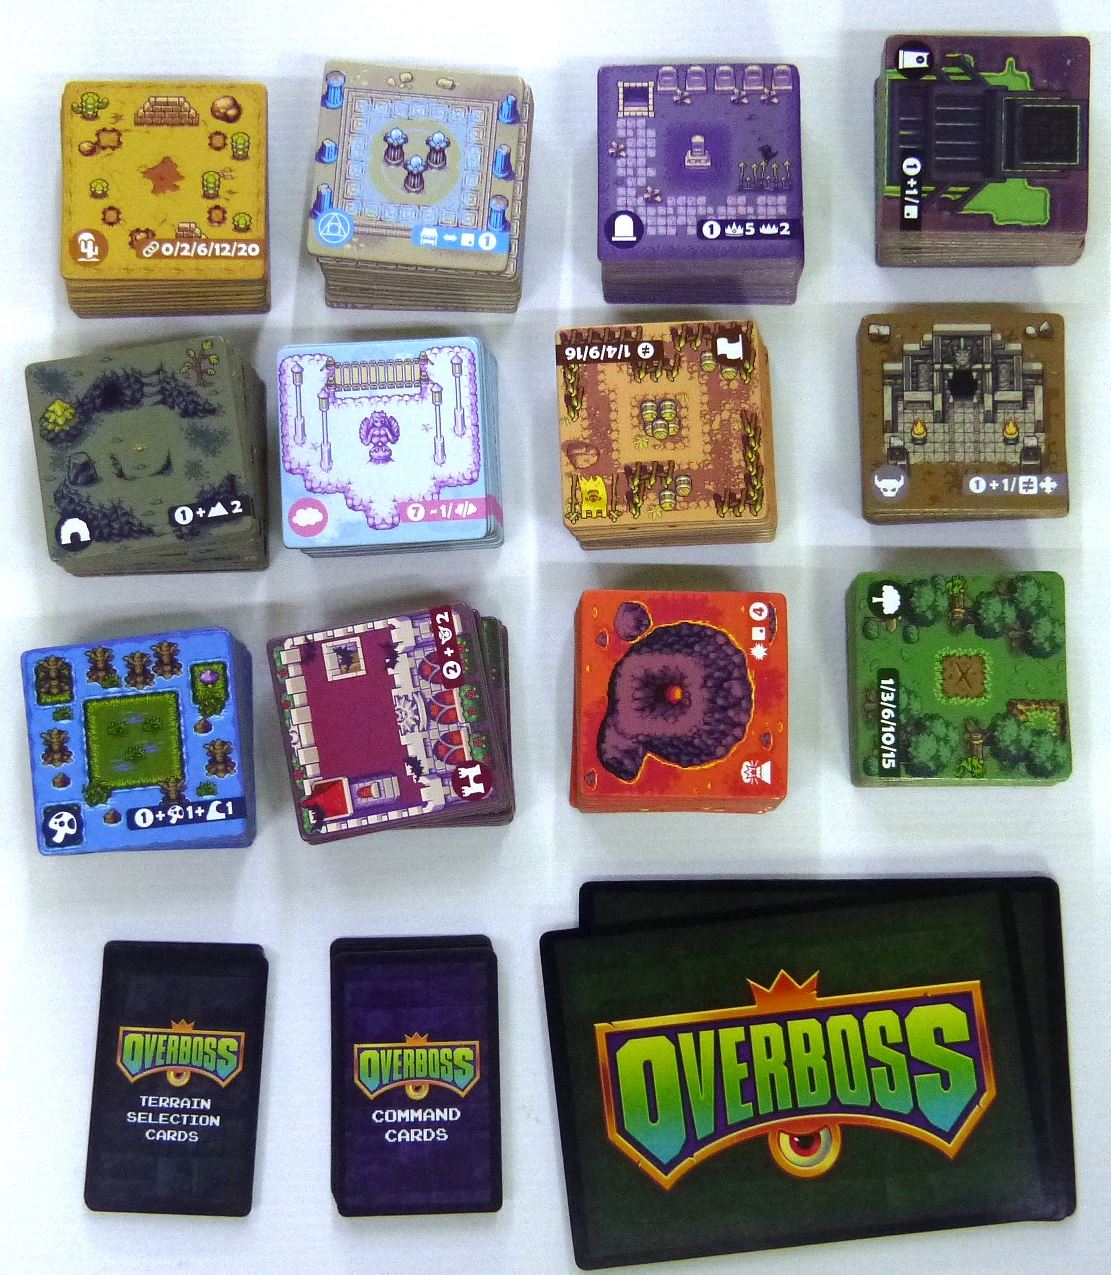 OVERBOSS Boardgame - board game #1LE